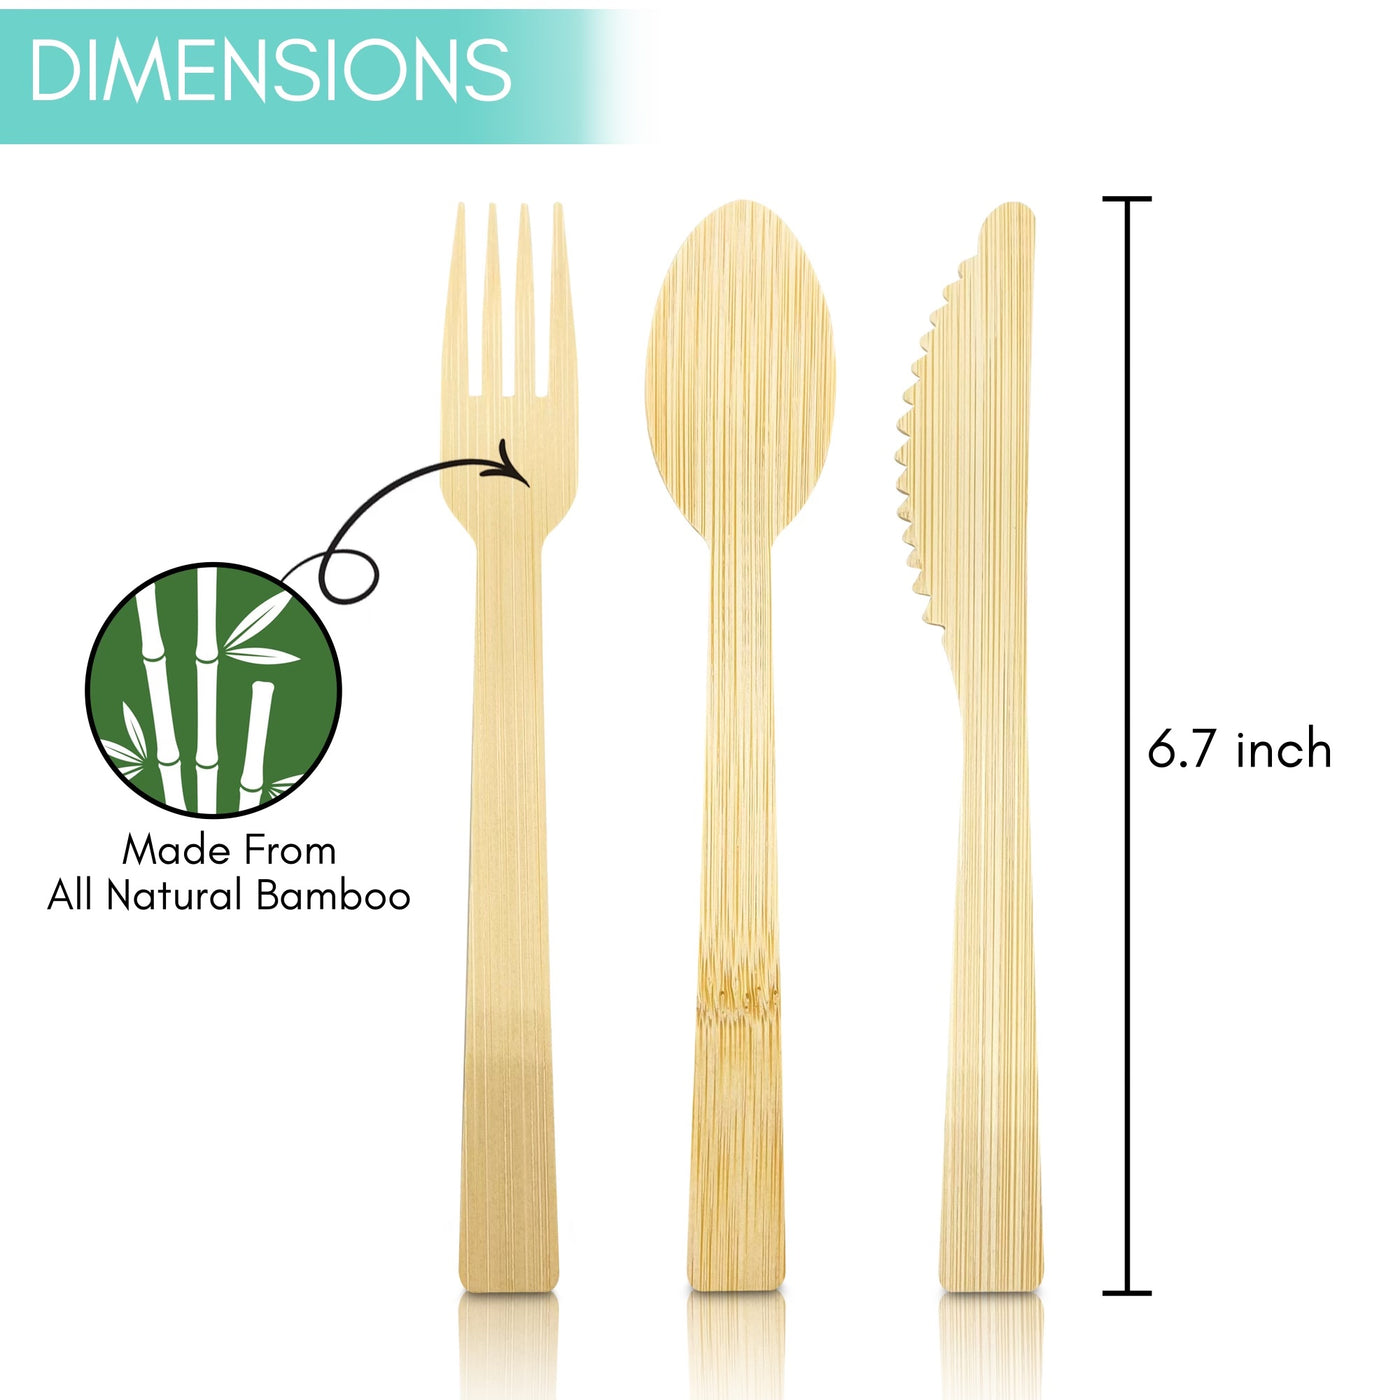 bamboo cutlery dimensions